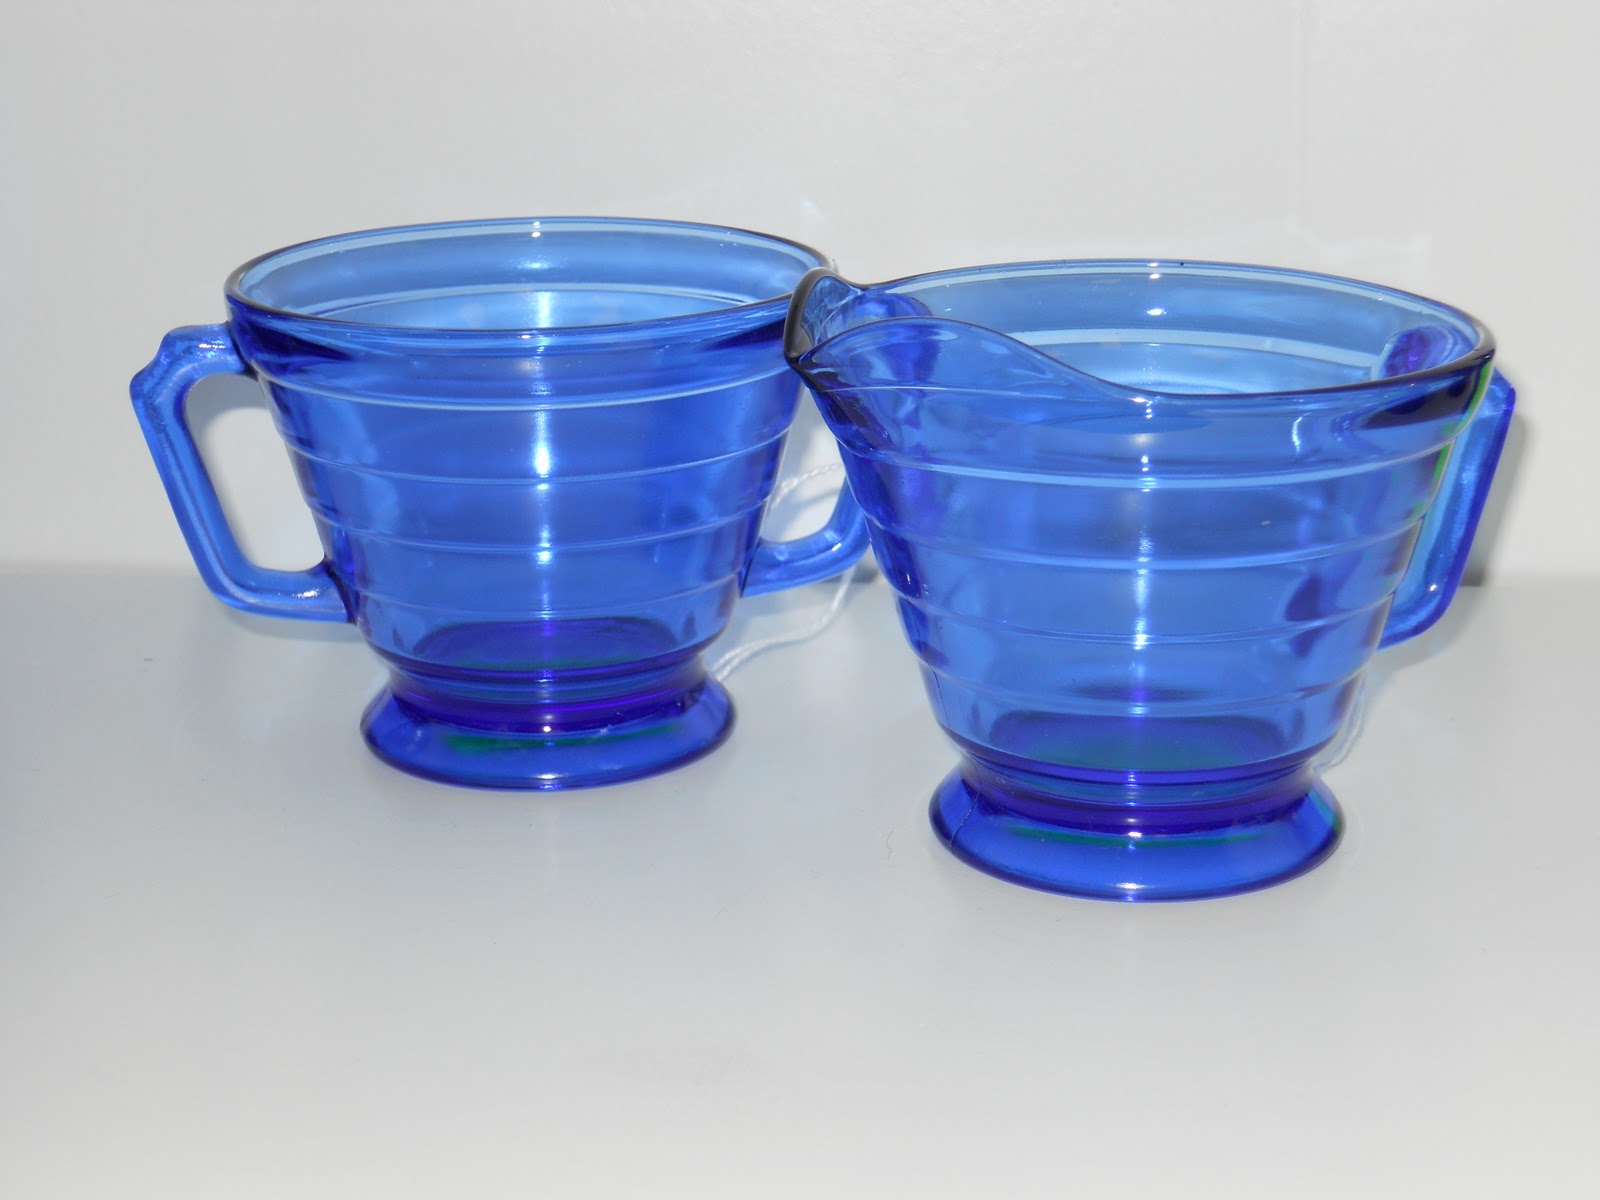 Download Antiques for Today's Lifestyle: Cobalt Blue Depression Glass